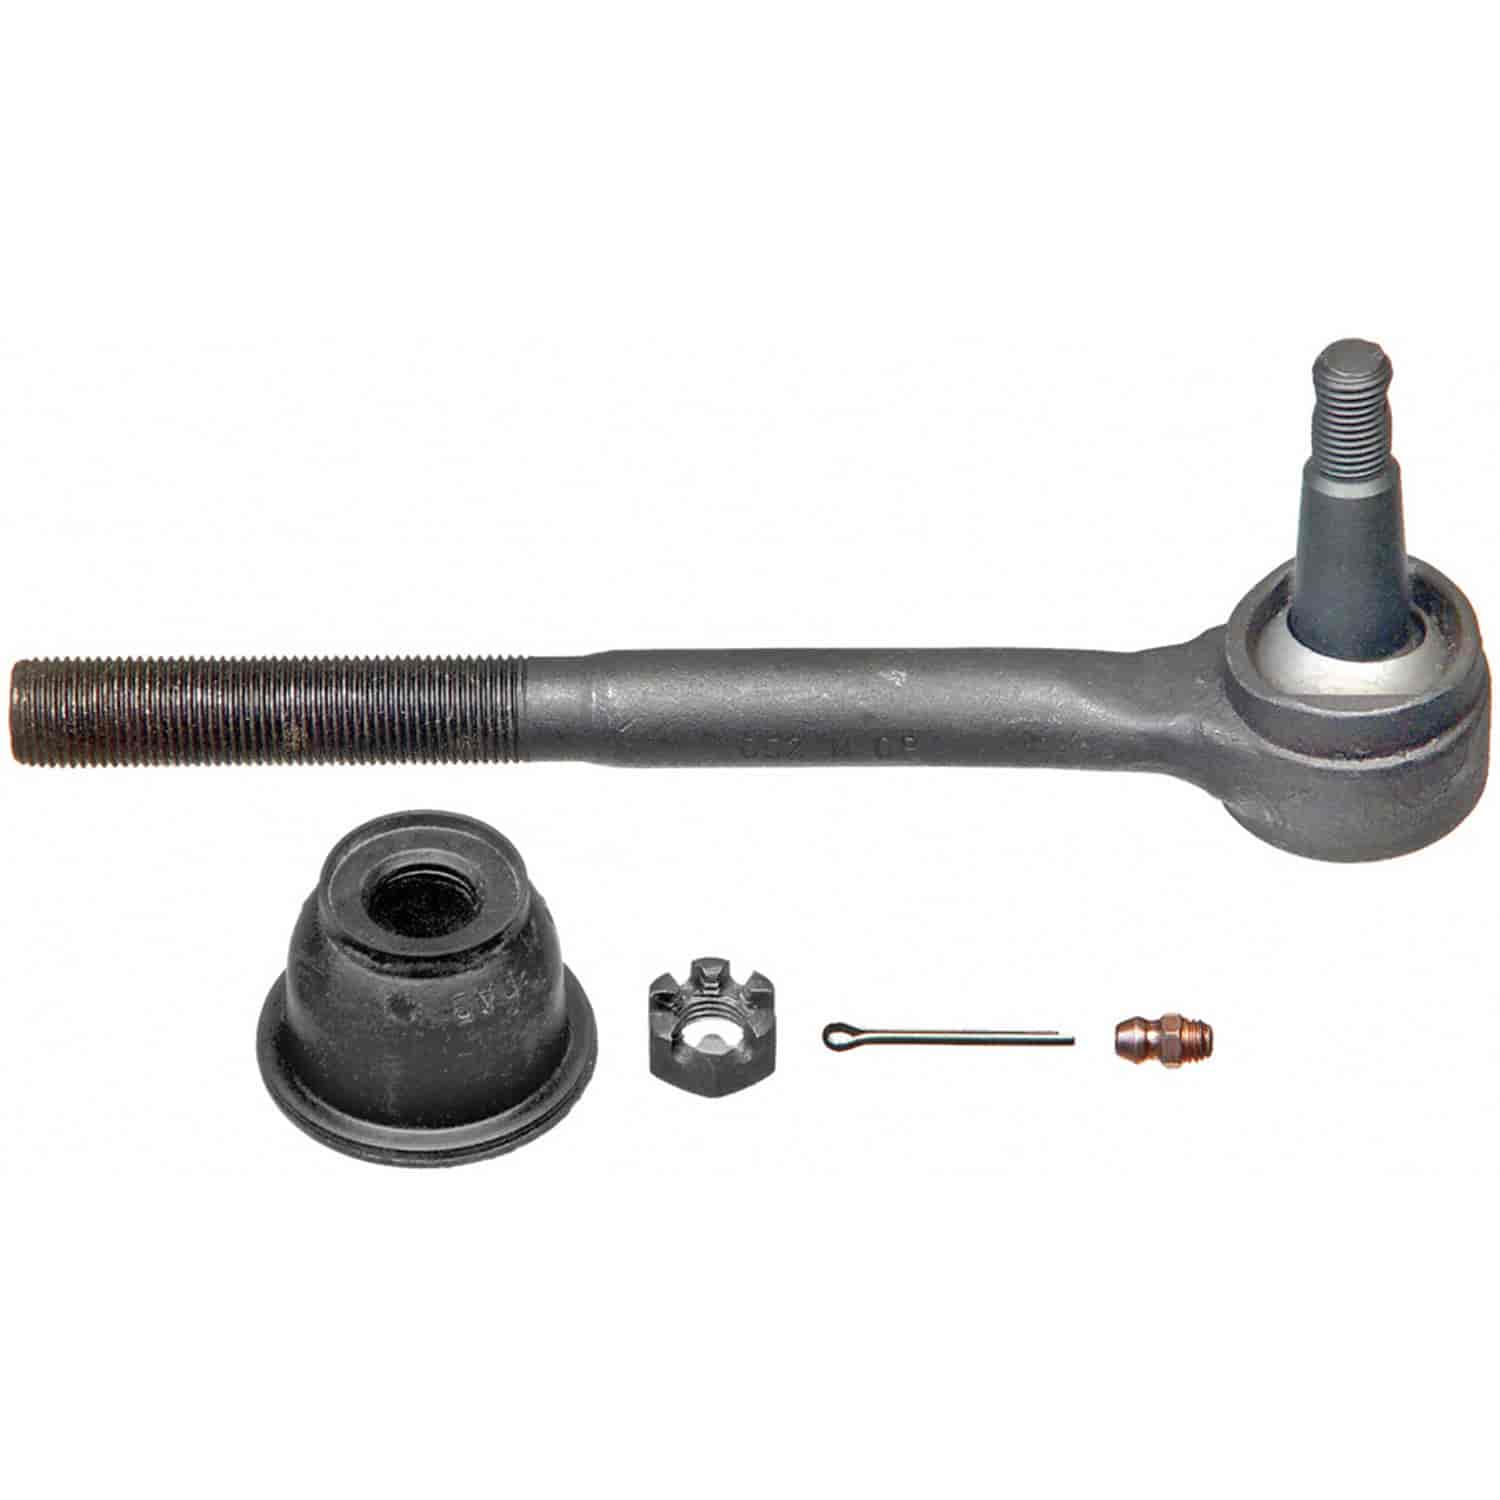 Tie Rod End Fits Select 1969-1970 Chevrolet Models